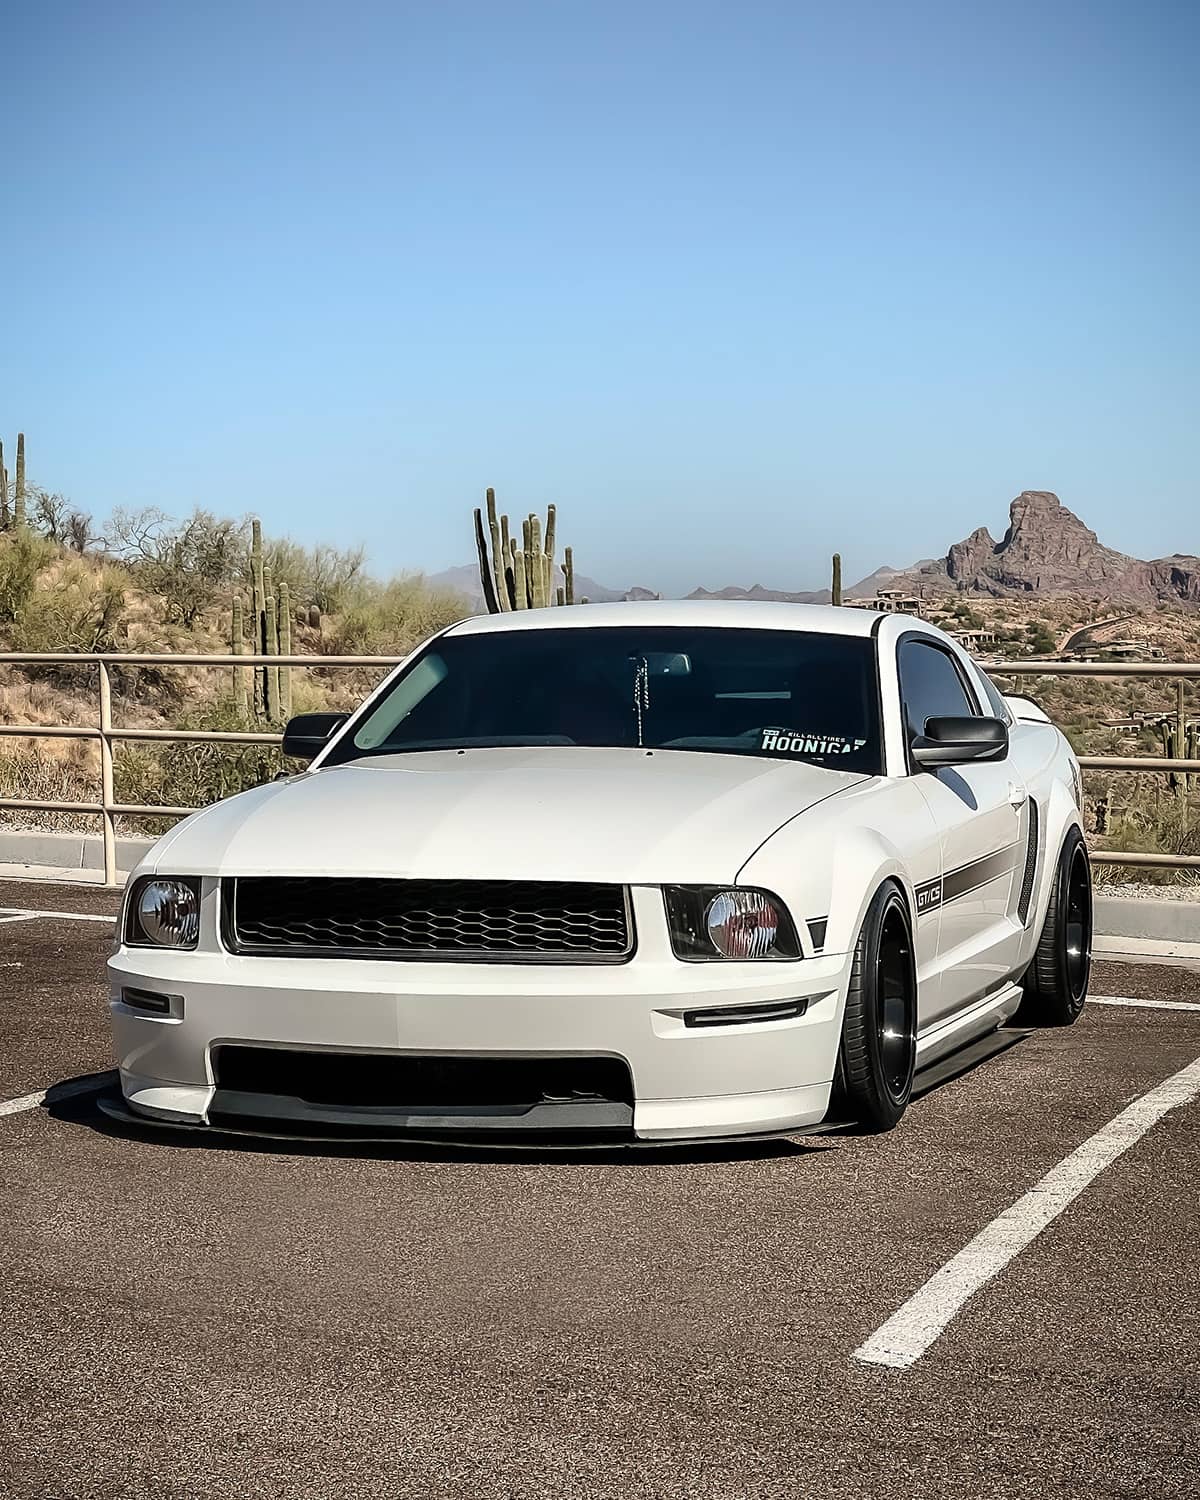 2008 Ford Mustang GT California Special front bumper with a splitter